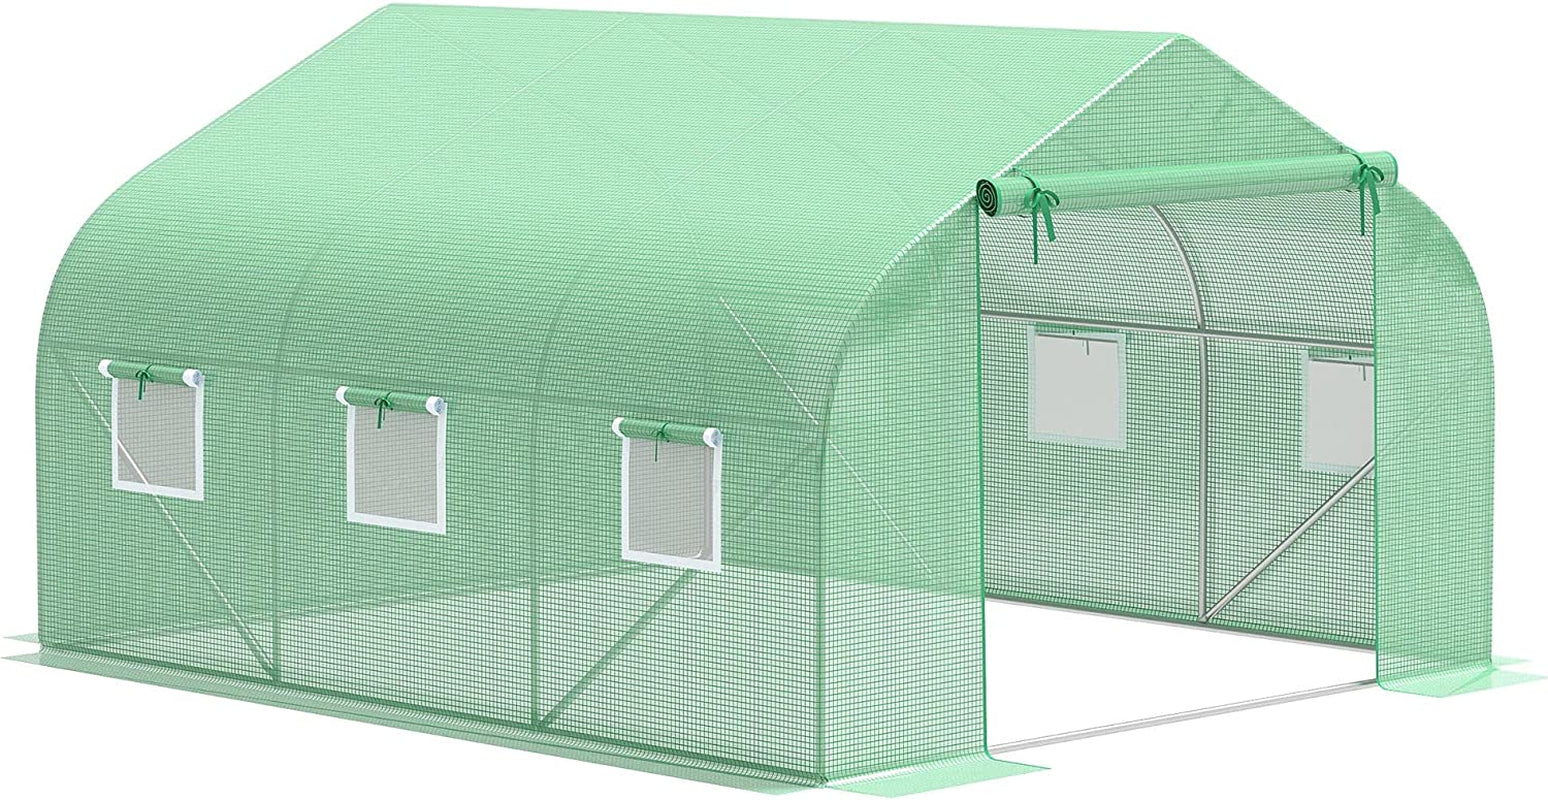 12' X 10' X 7' Outdoor Walk-In Greenhouse, Tunnel Green House with Roll-Up Windows, Zippered Door, PE Cover, Heavy Duty Steel Frame, Green - Design By Technique